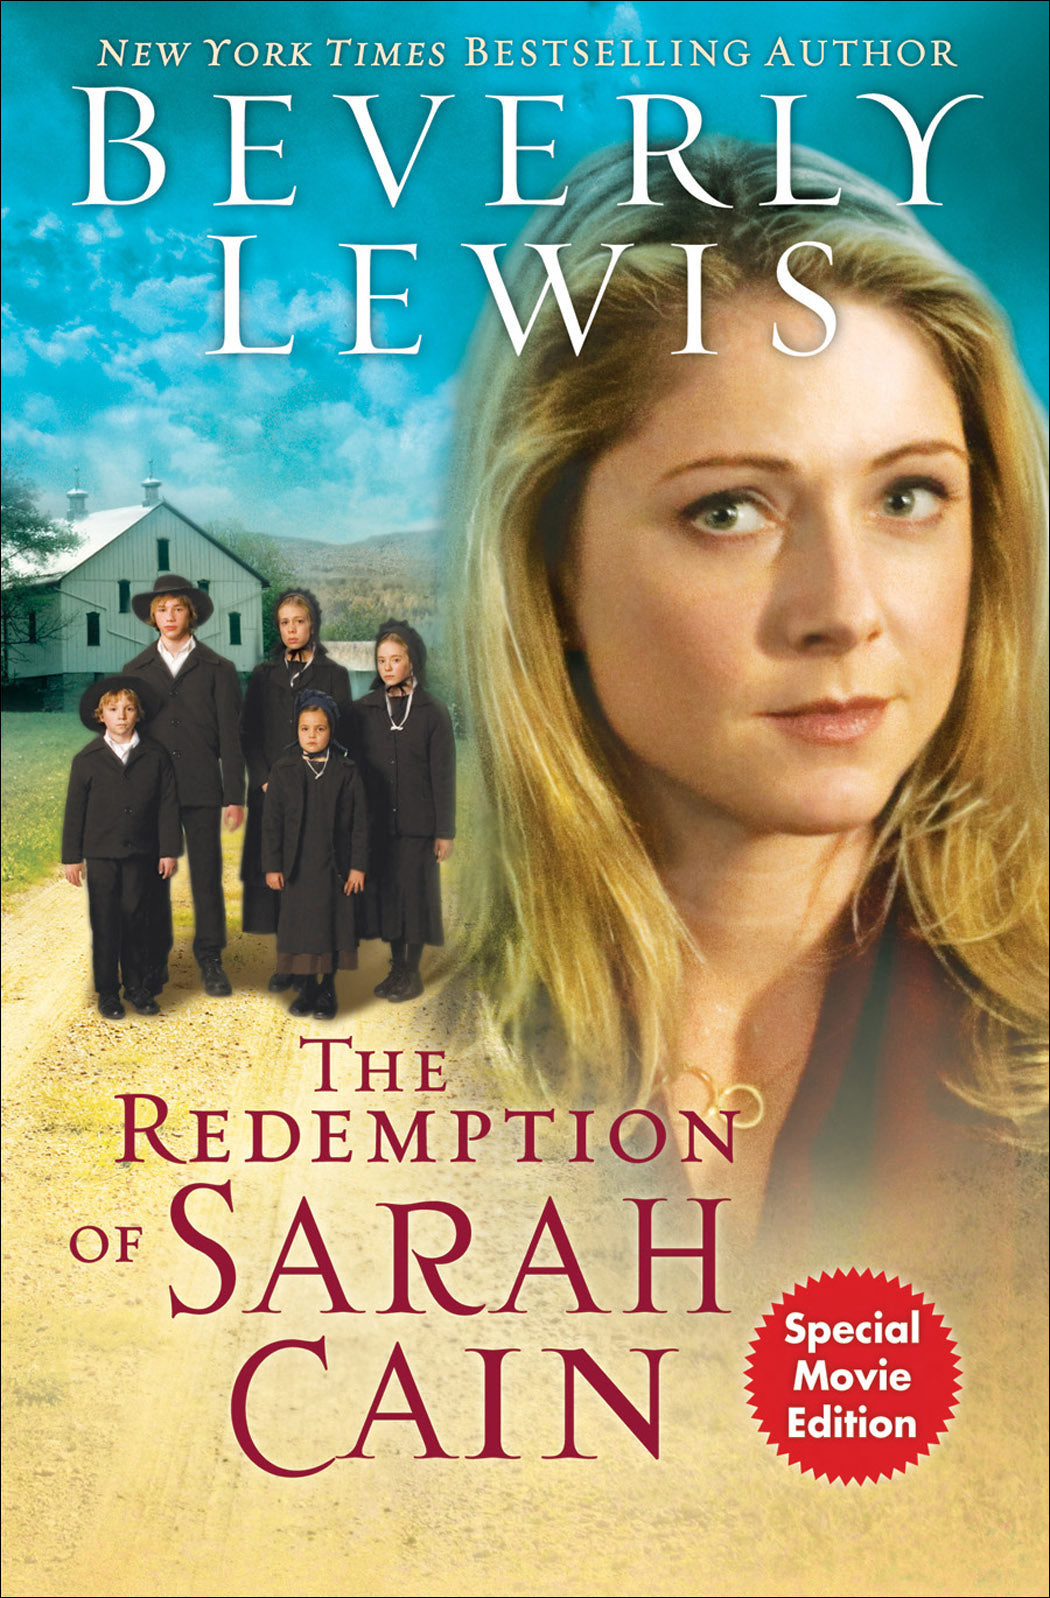 Redemption of Sarah Cain, The